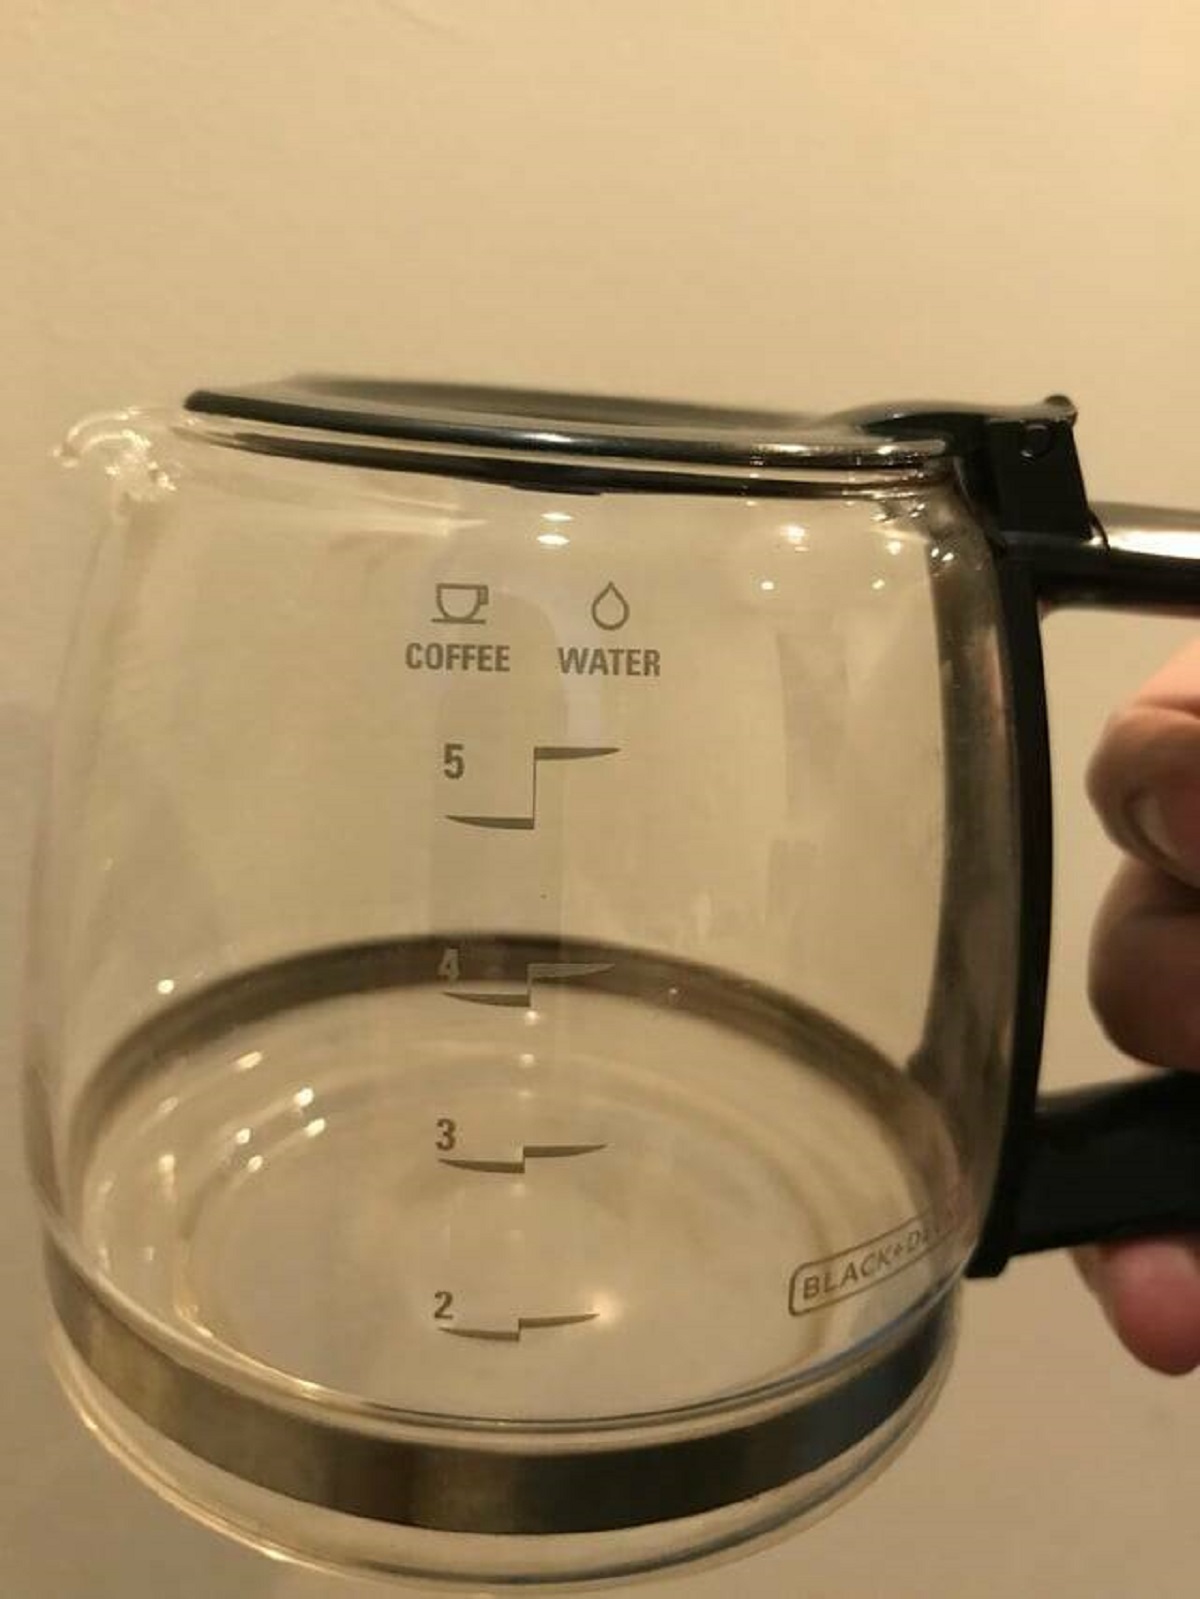 "Coffee pot shows different levels for water in vs coffee out"